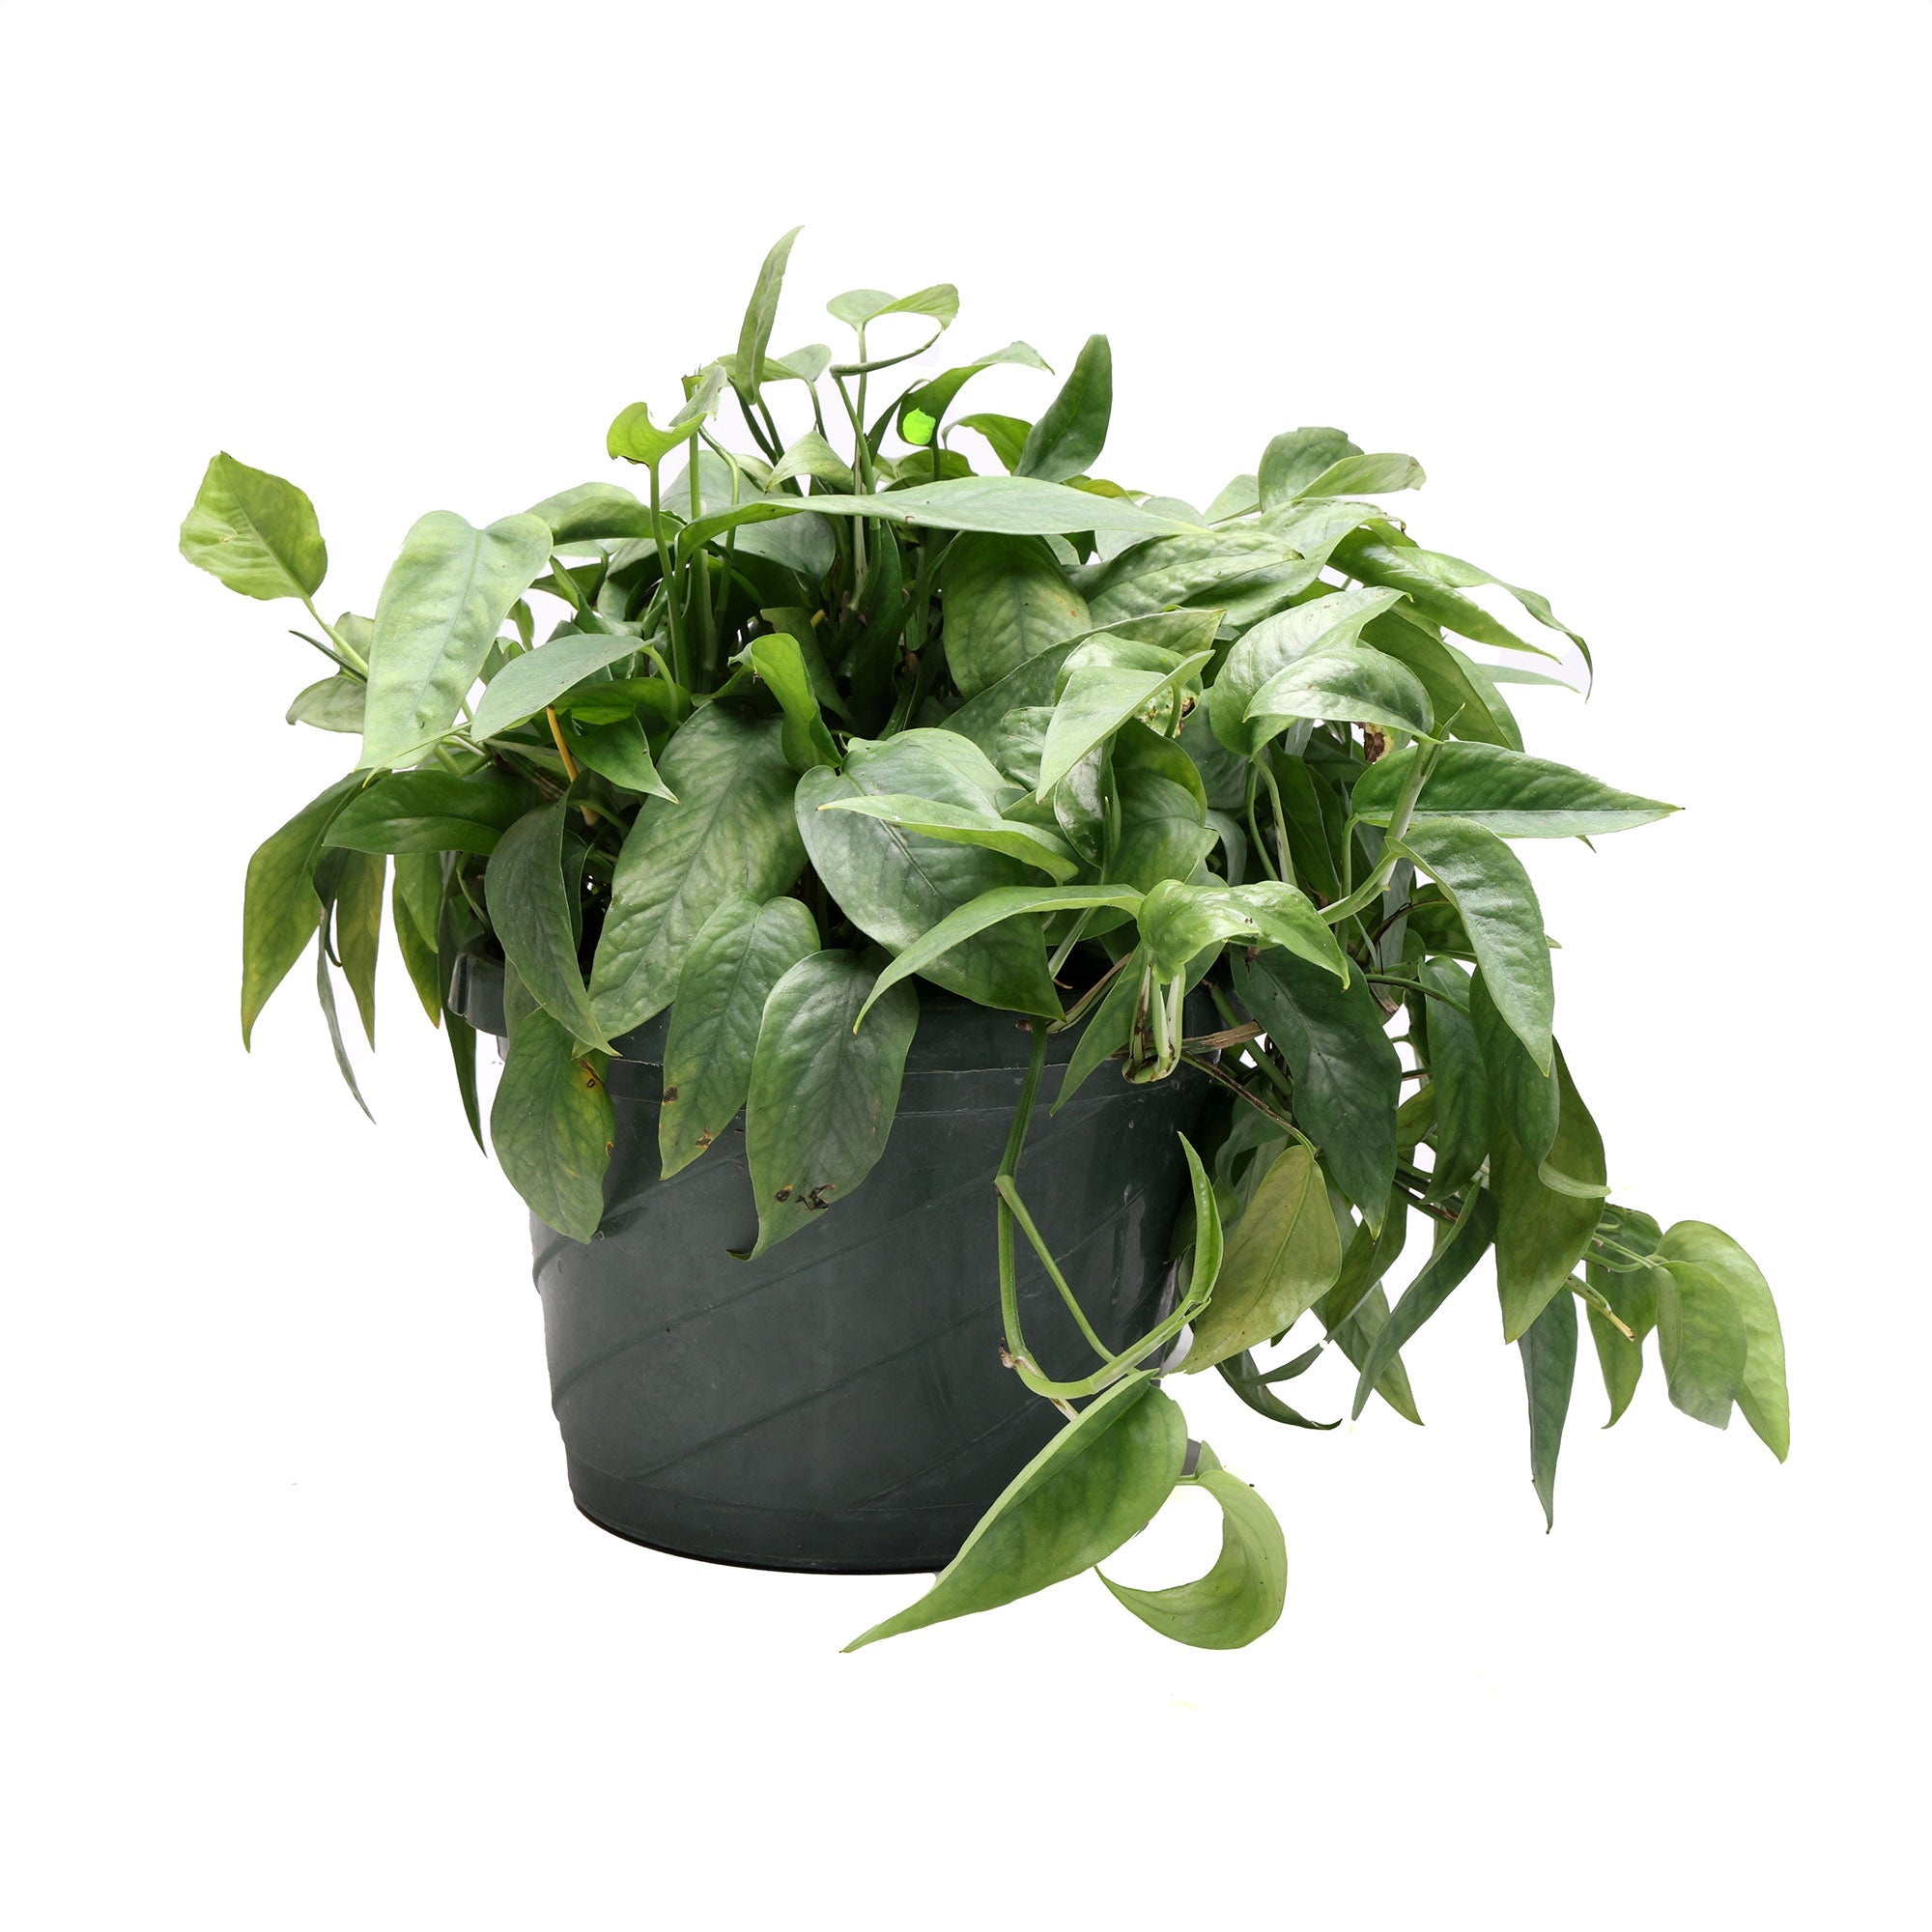 A lush, green Pothos Cebu Blue 8 Inch Pot in a dark green plastic pot by Chive Studio 2024. This air-purifying houseplant has heart-shaped leaves with a glossy texture, cascading gracefully over the edges of the pot. The background is plain white.